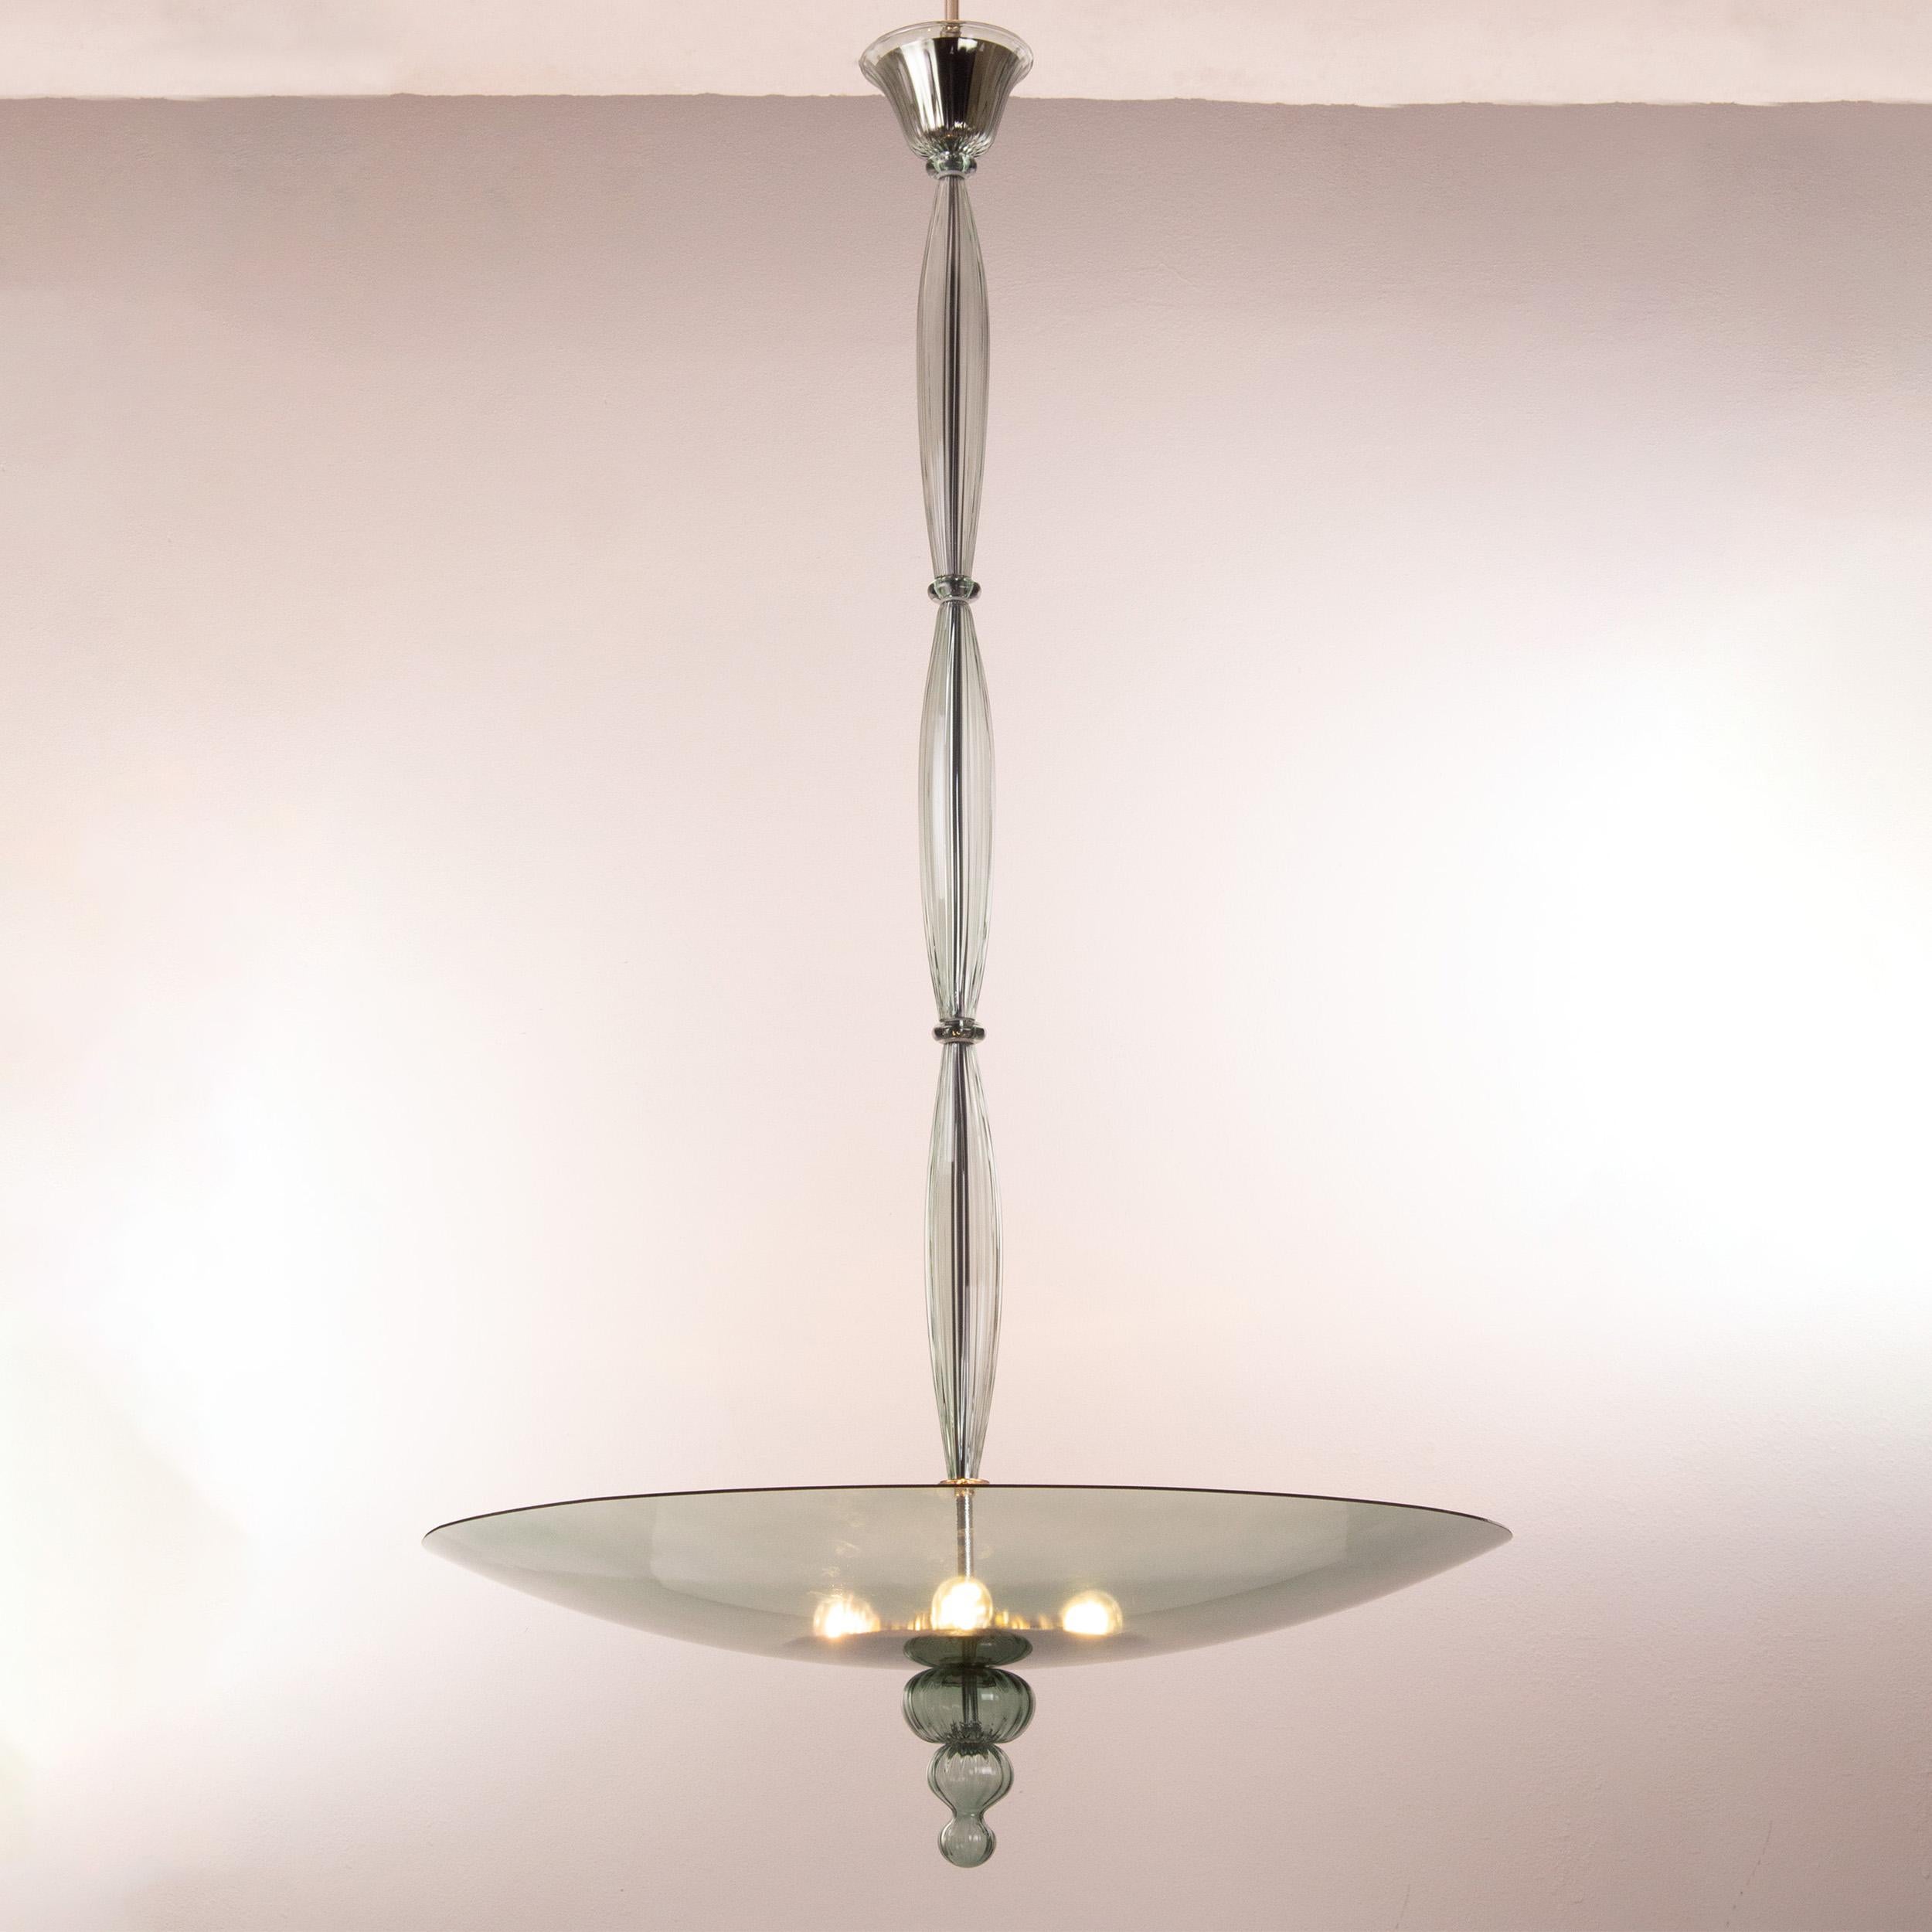 This vintage suspension lighting has a neat and simple design. 
The preciousness of it is in the central rod, the ceiling rosette and the final detail as it has a rigadin handmade texture.

It has 4 lights and the fixture is in nickel